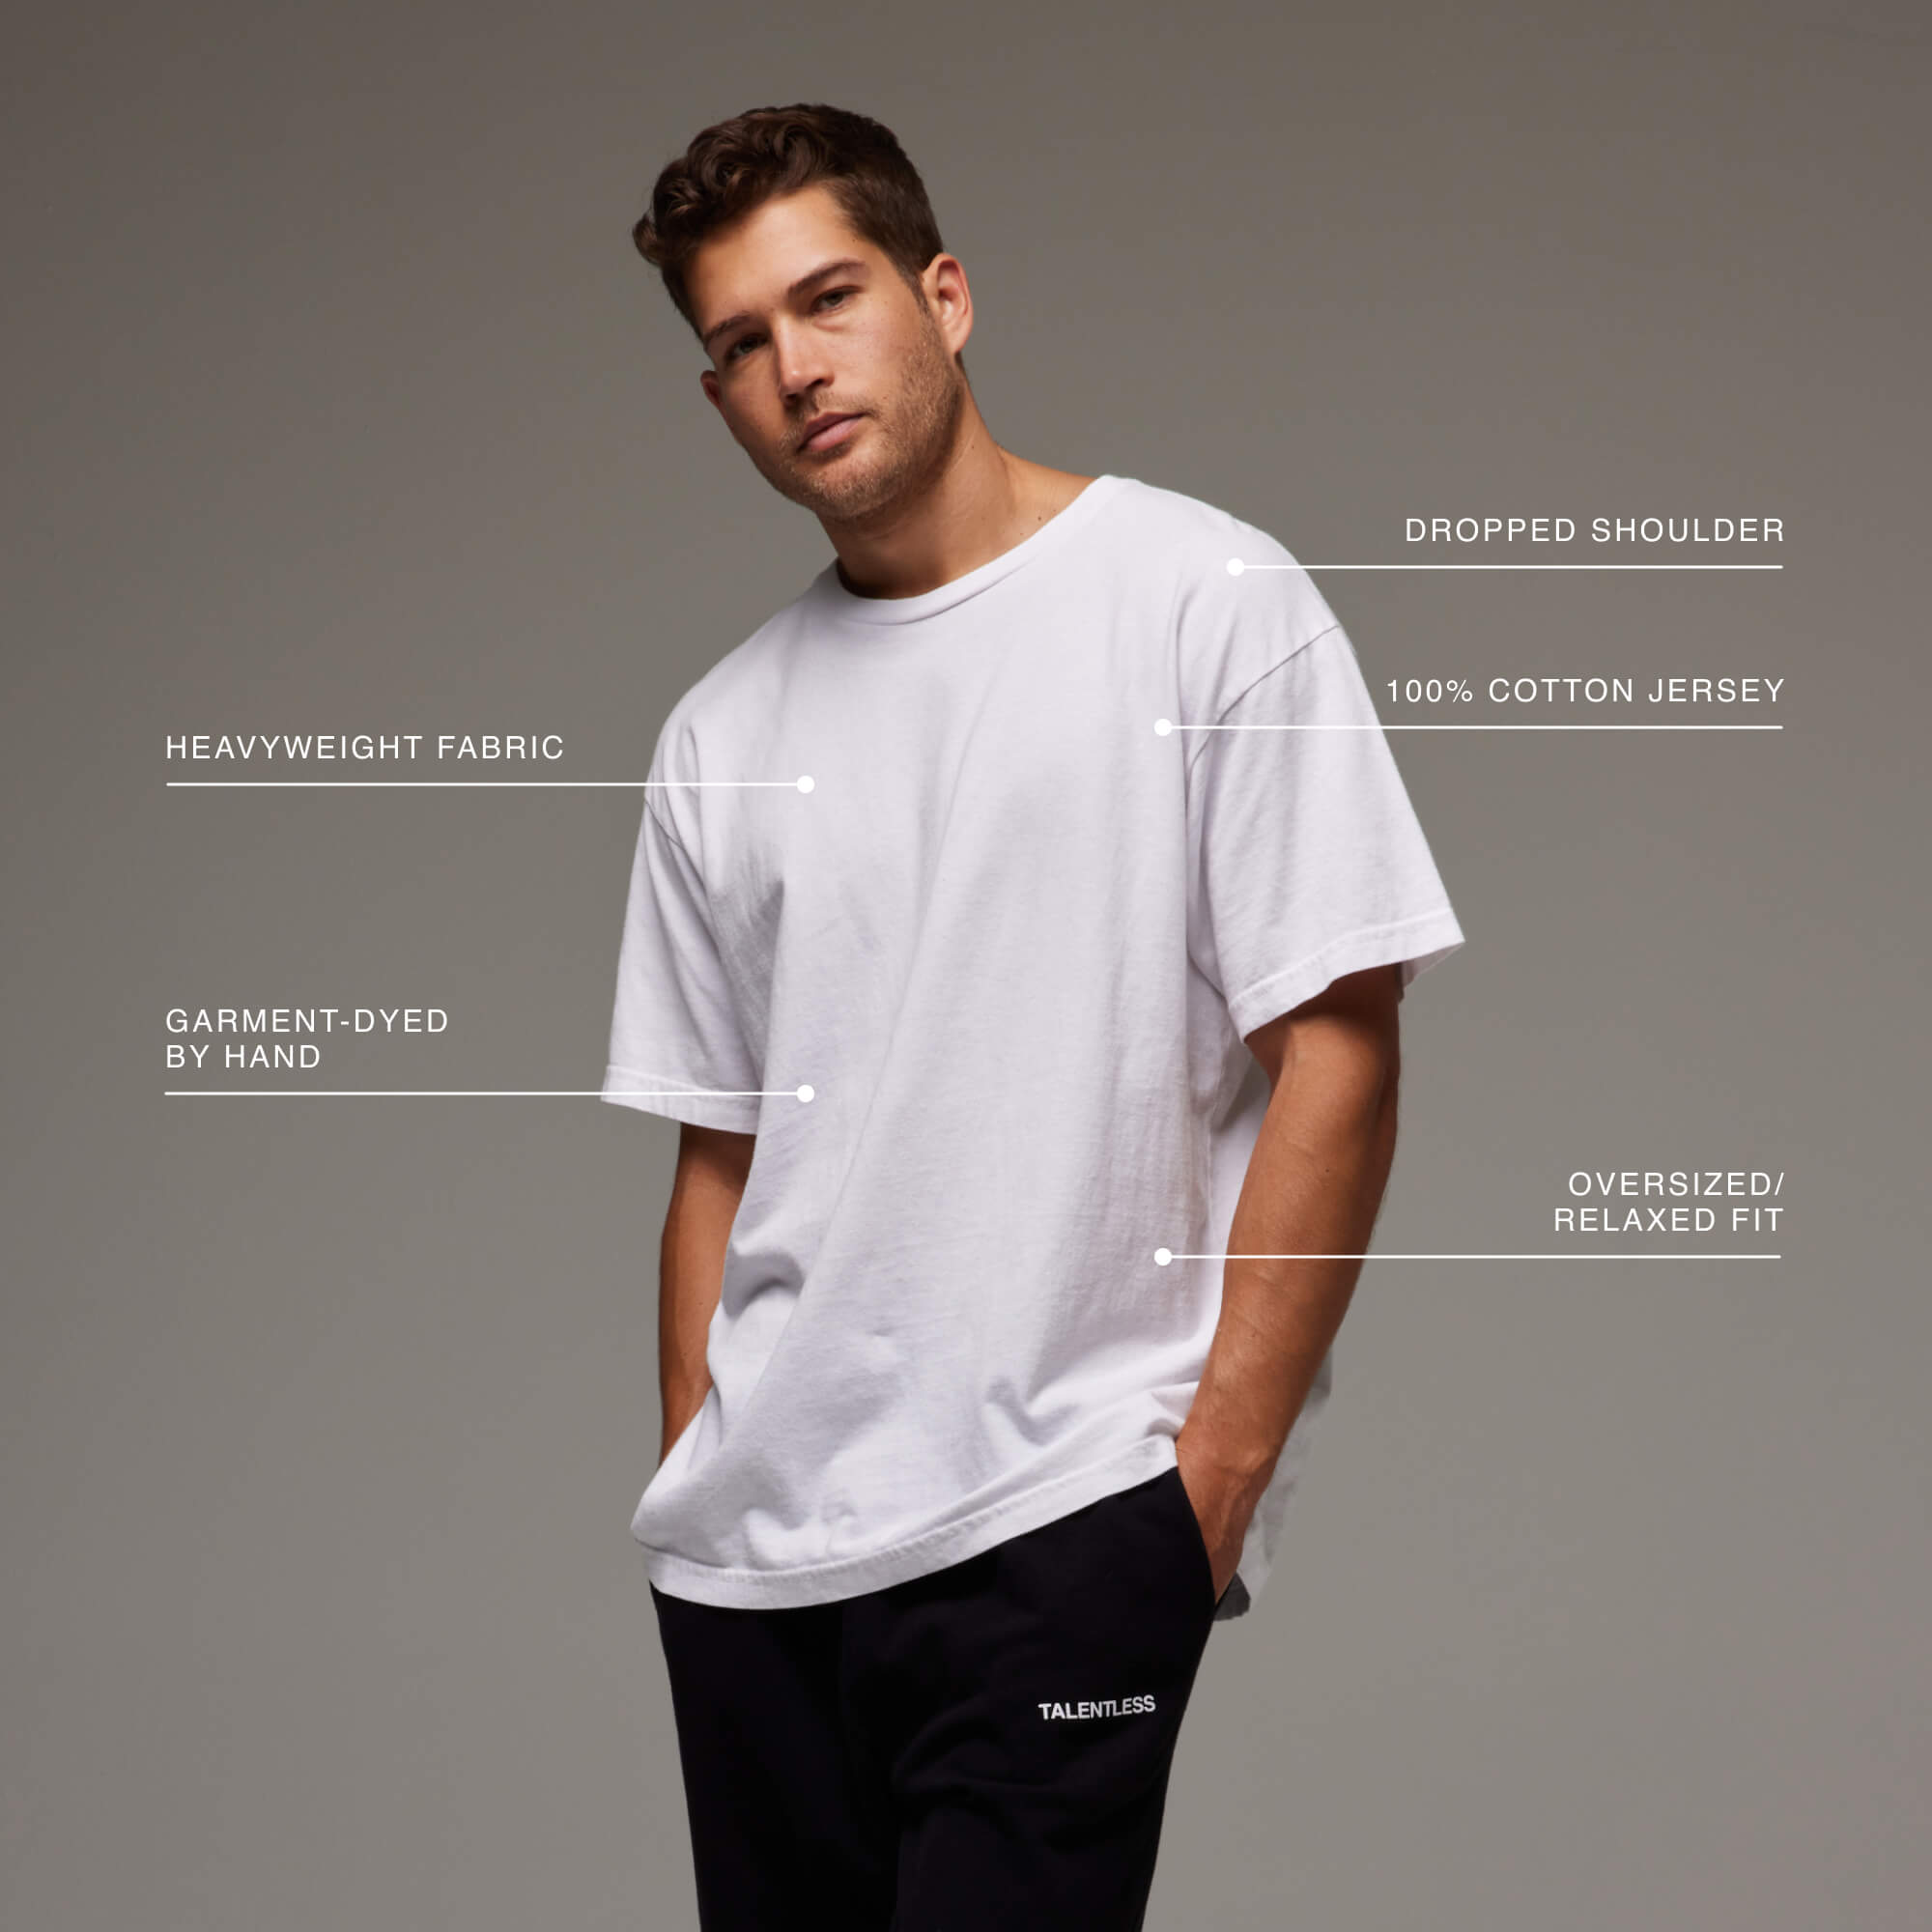 Drop Shoulder T-Shirt For Men: The Ultimate Guide to Style